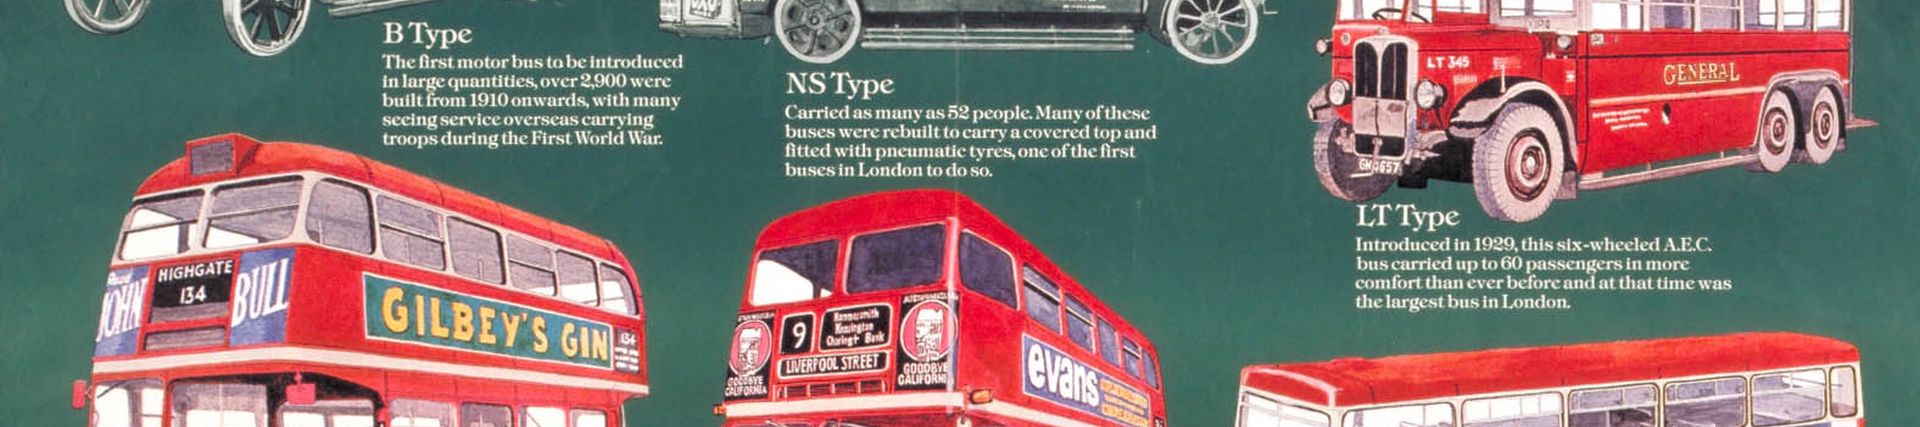 Poster; 150 years of London's Buses by Mike Ingham, 1979